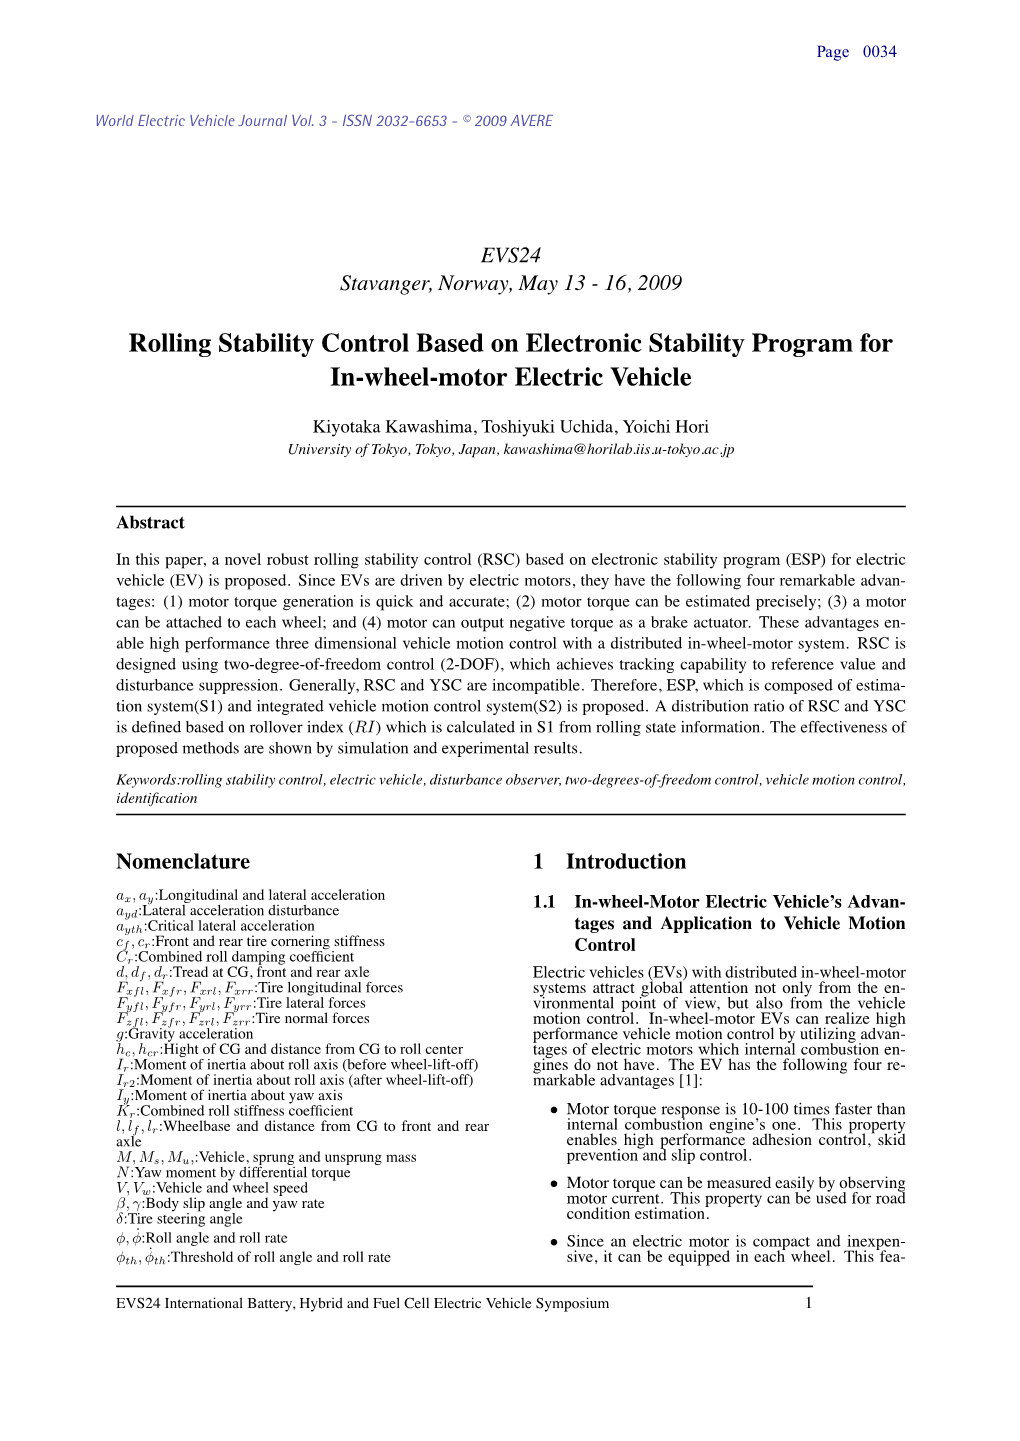 Rolling Stability Control Based on Electronic Stability Program for In-Wheel-Motor Electric Vehicle